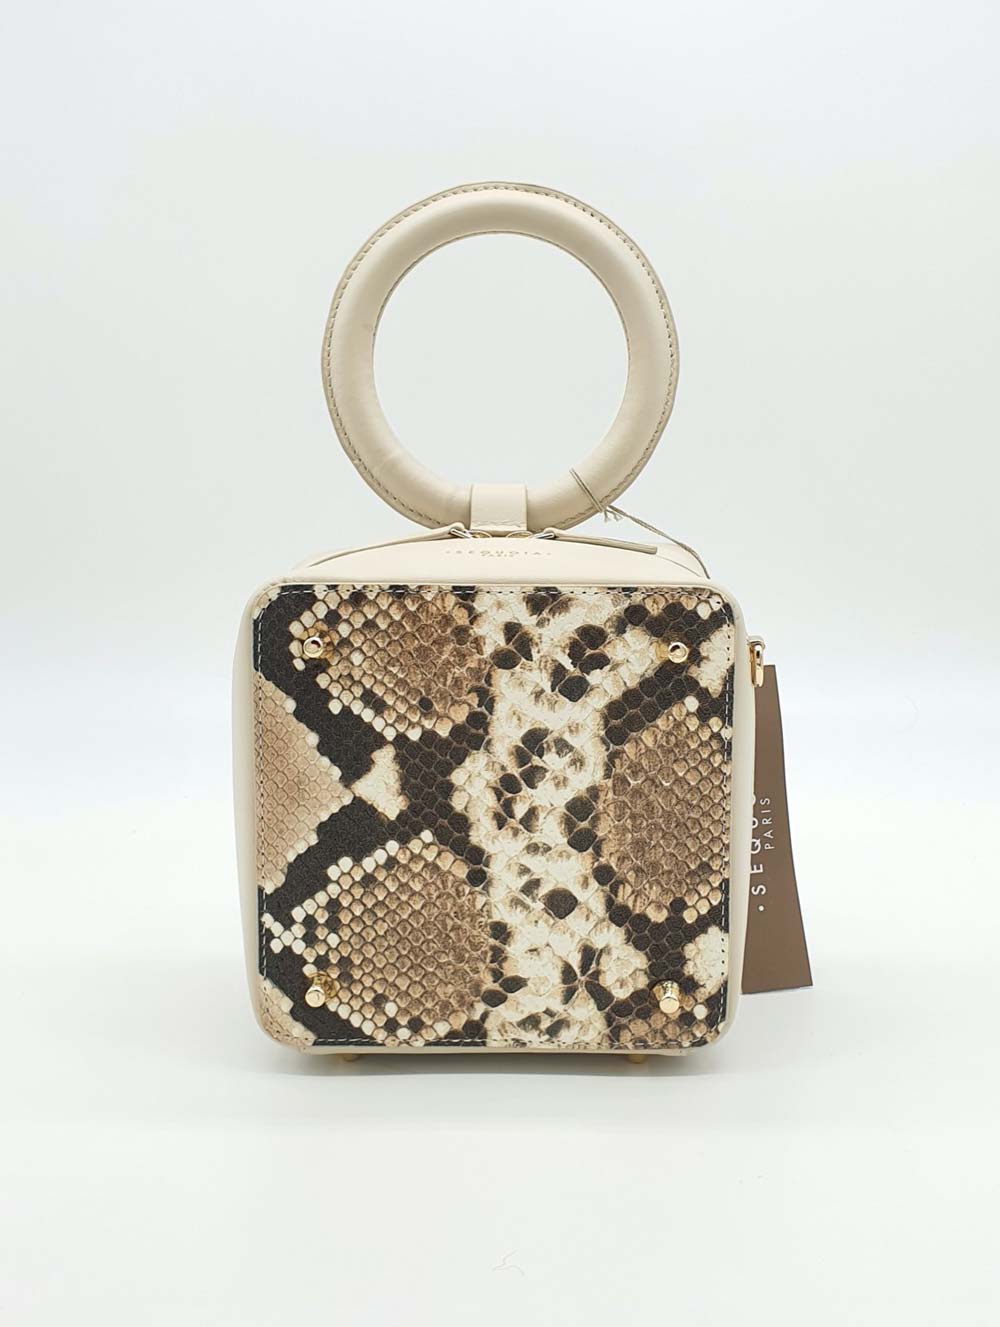 Sequoia Exotic Cube Bag in Beige - Selectionne PH